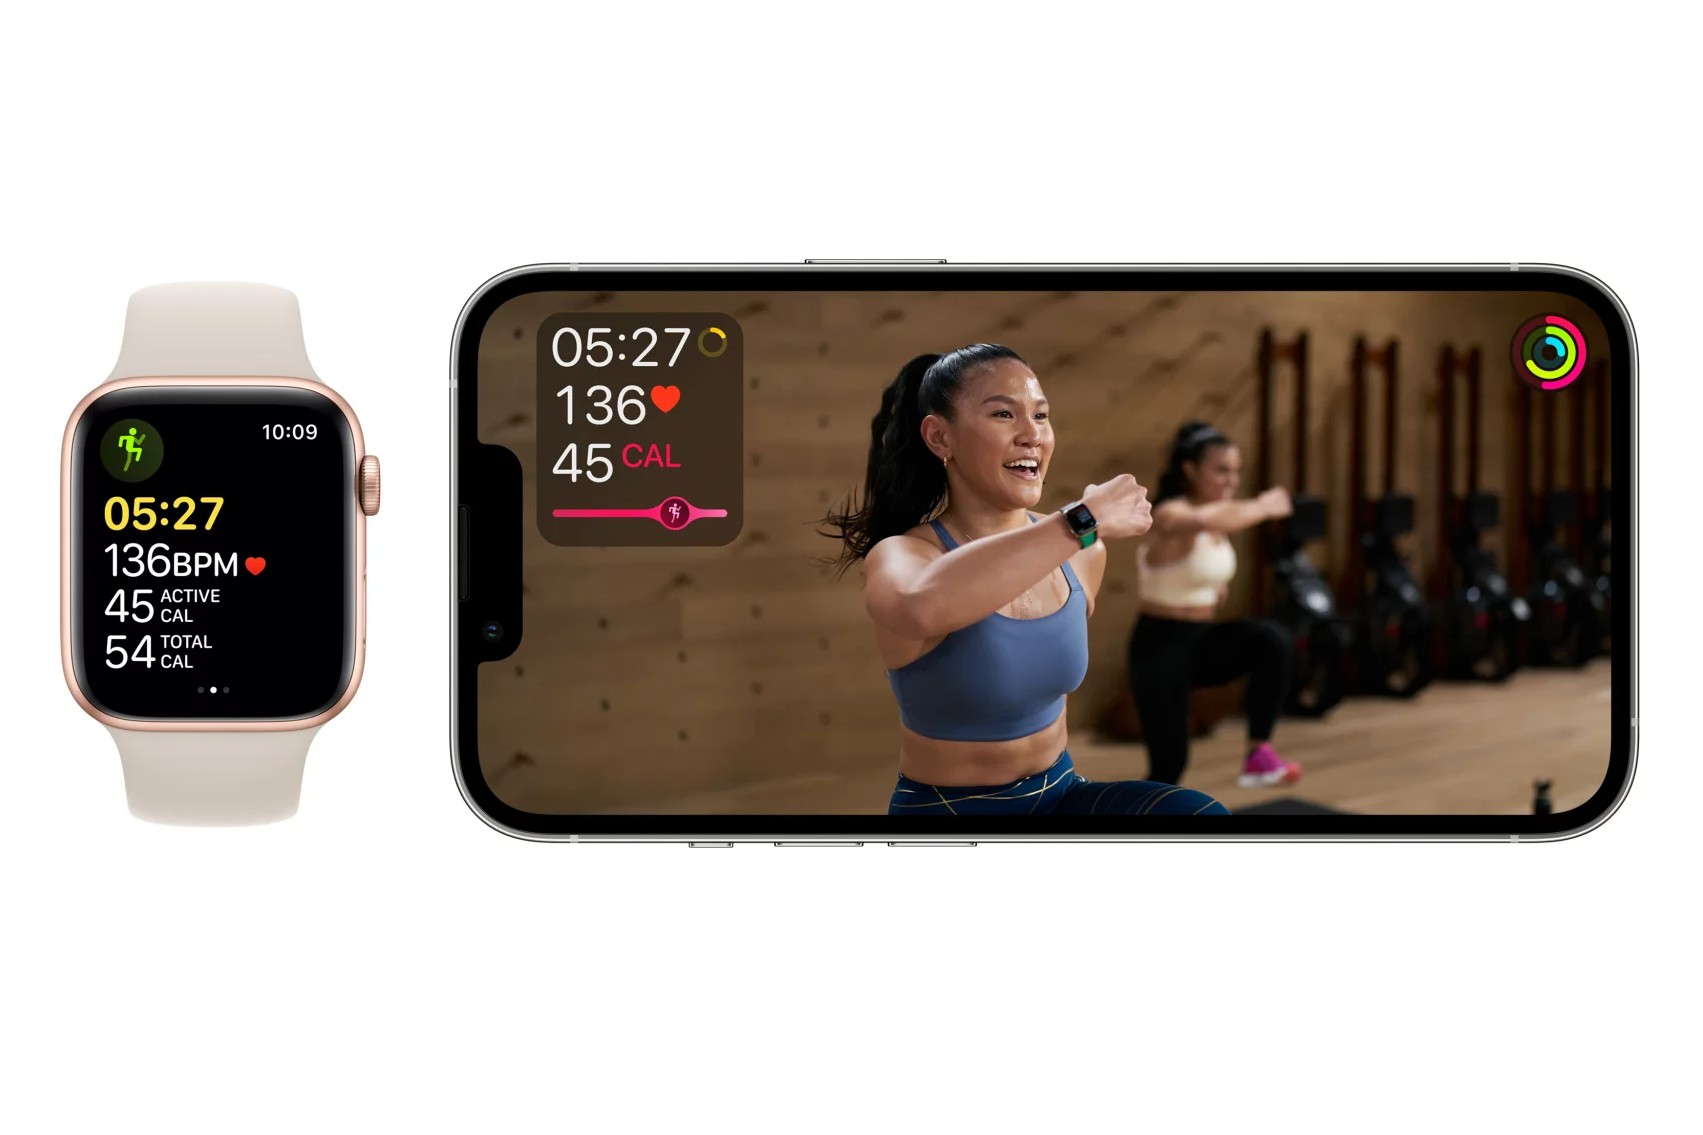 Apple Watch SE next to iPhone showing Apple Fitness +